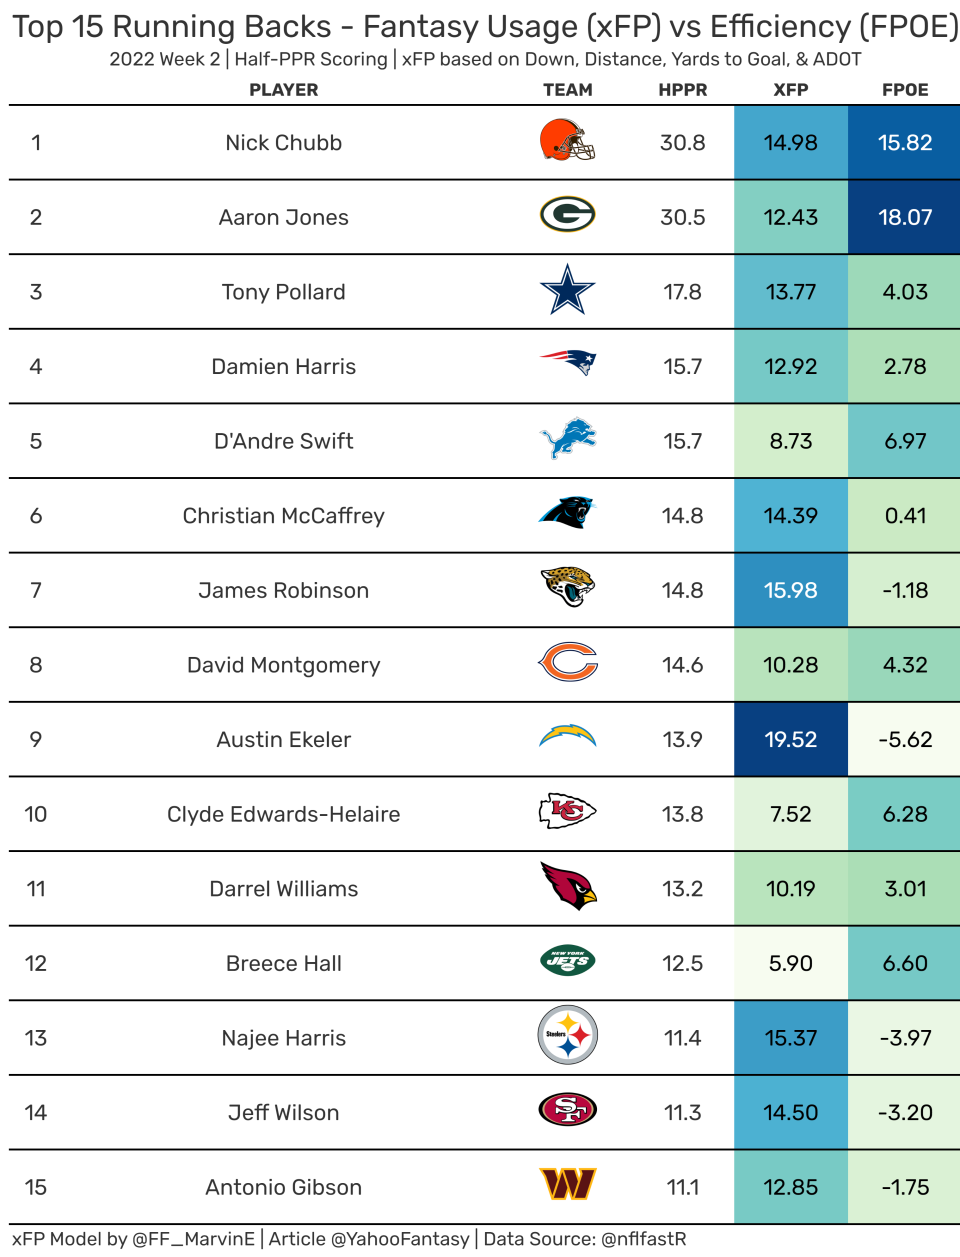 Top 15 Fantasy Running backs from Week 2. (Data used provided by nflfastR)